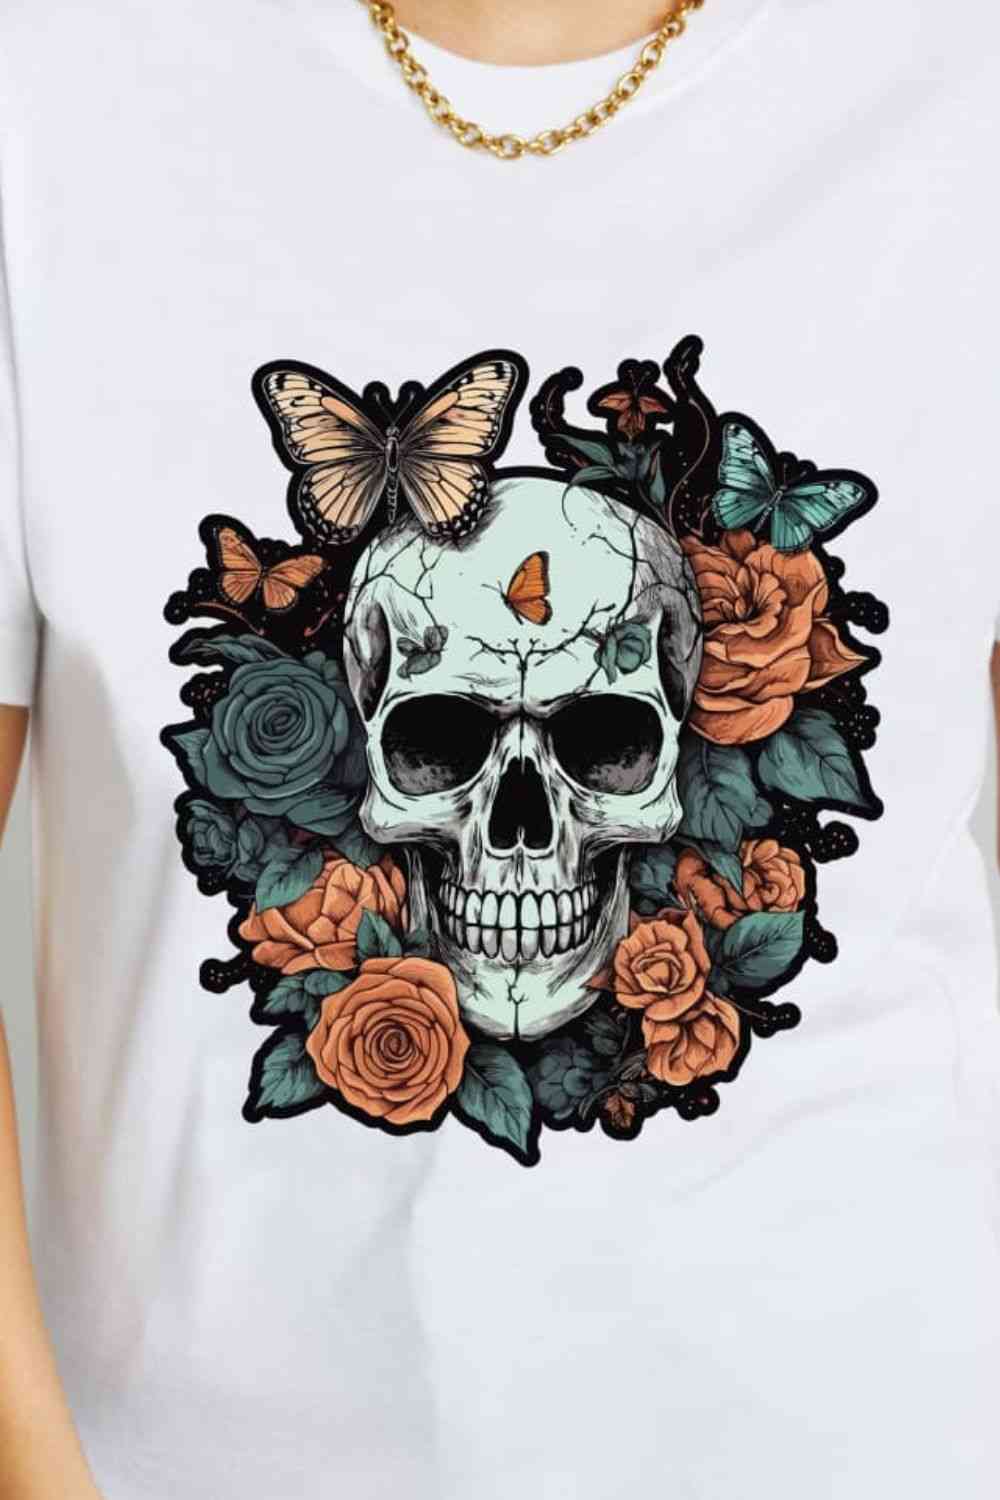 Simply Love Simply Love Full Size Skull Graphic Cotton T-Shirt - Guy Christopher 